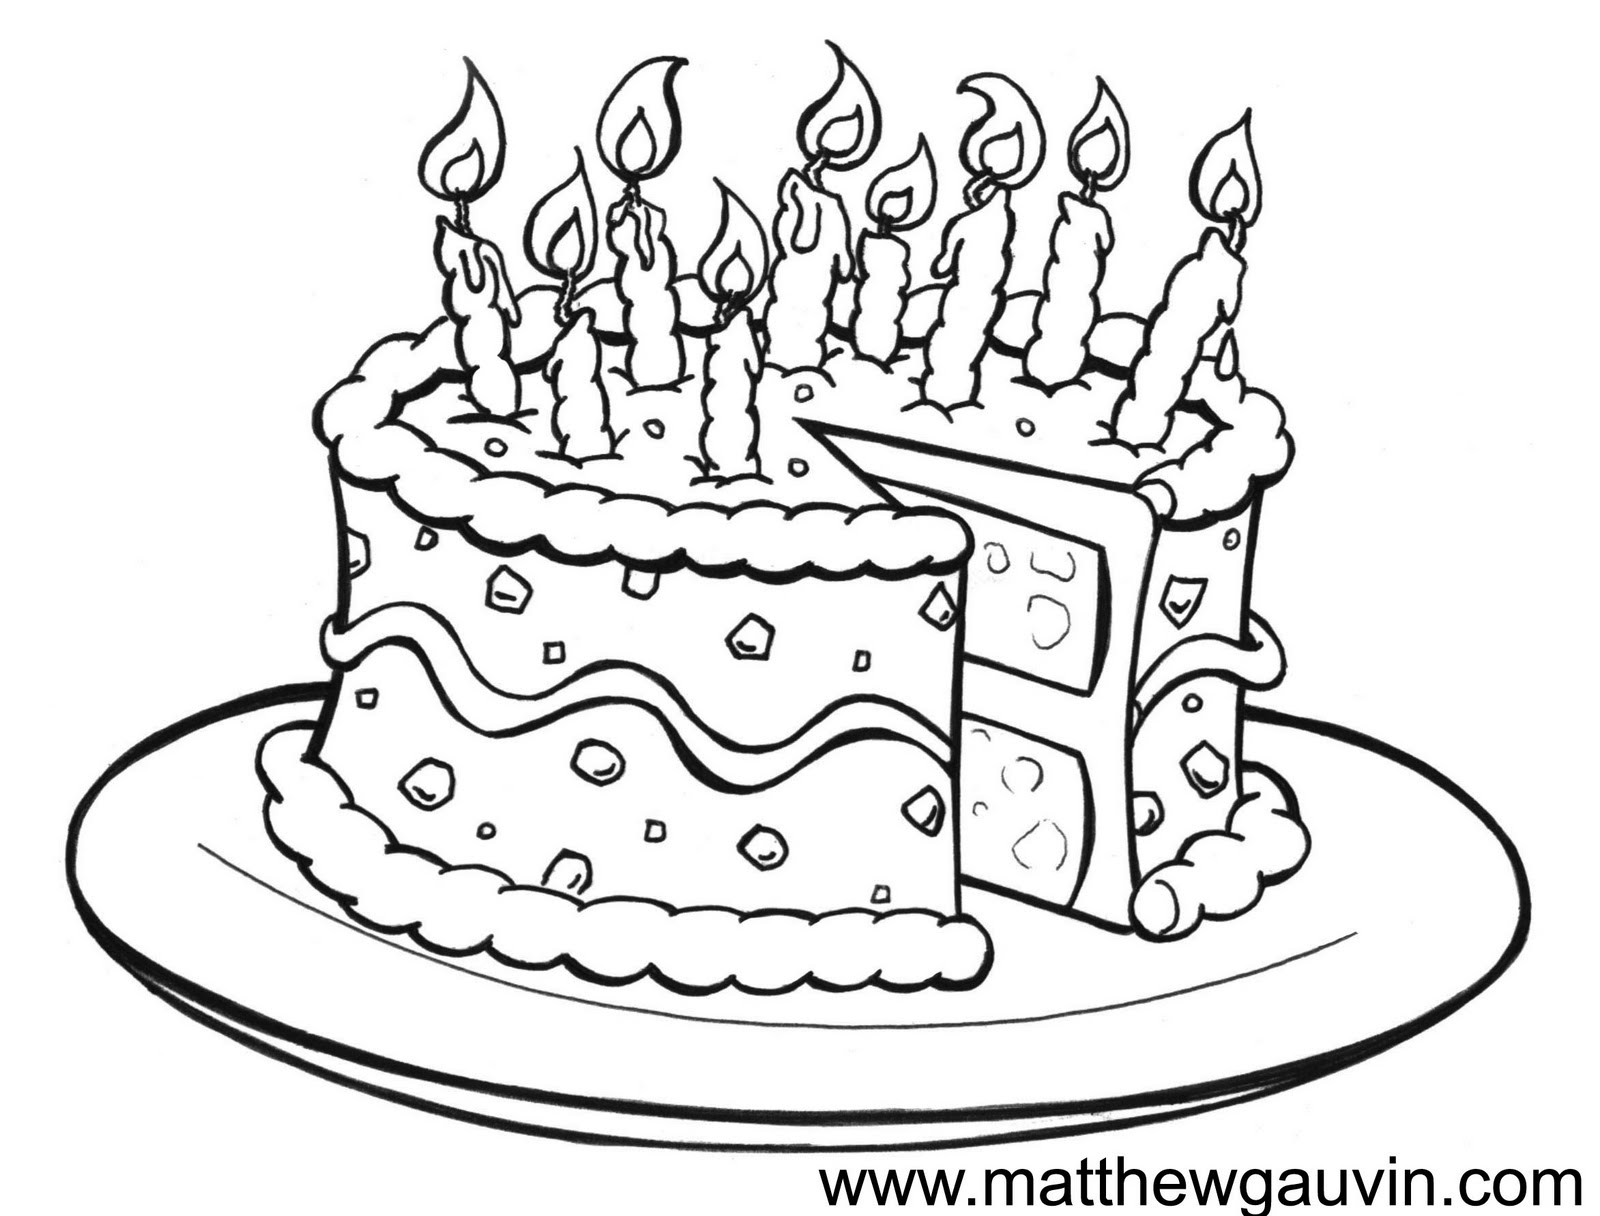 Simple Coloring Page. Coloring Book with Cake Stock Vector - Illustration  of bakery, white: 235524759